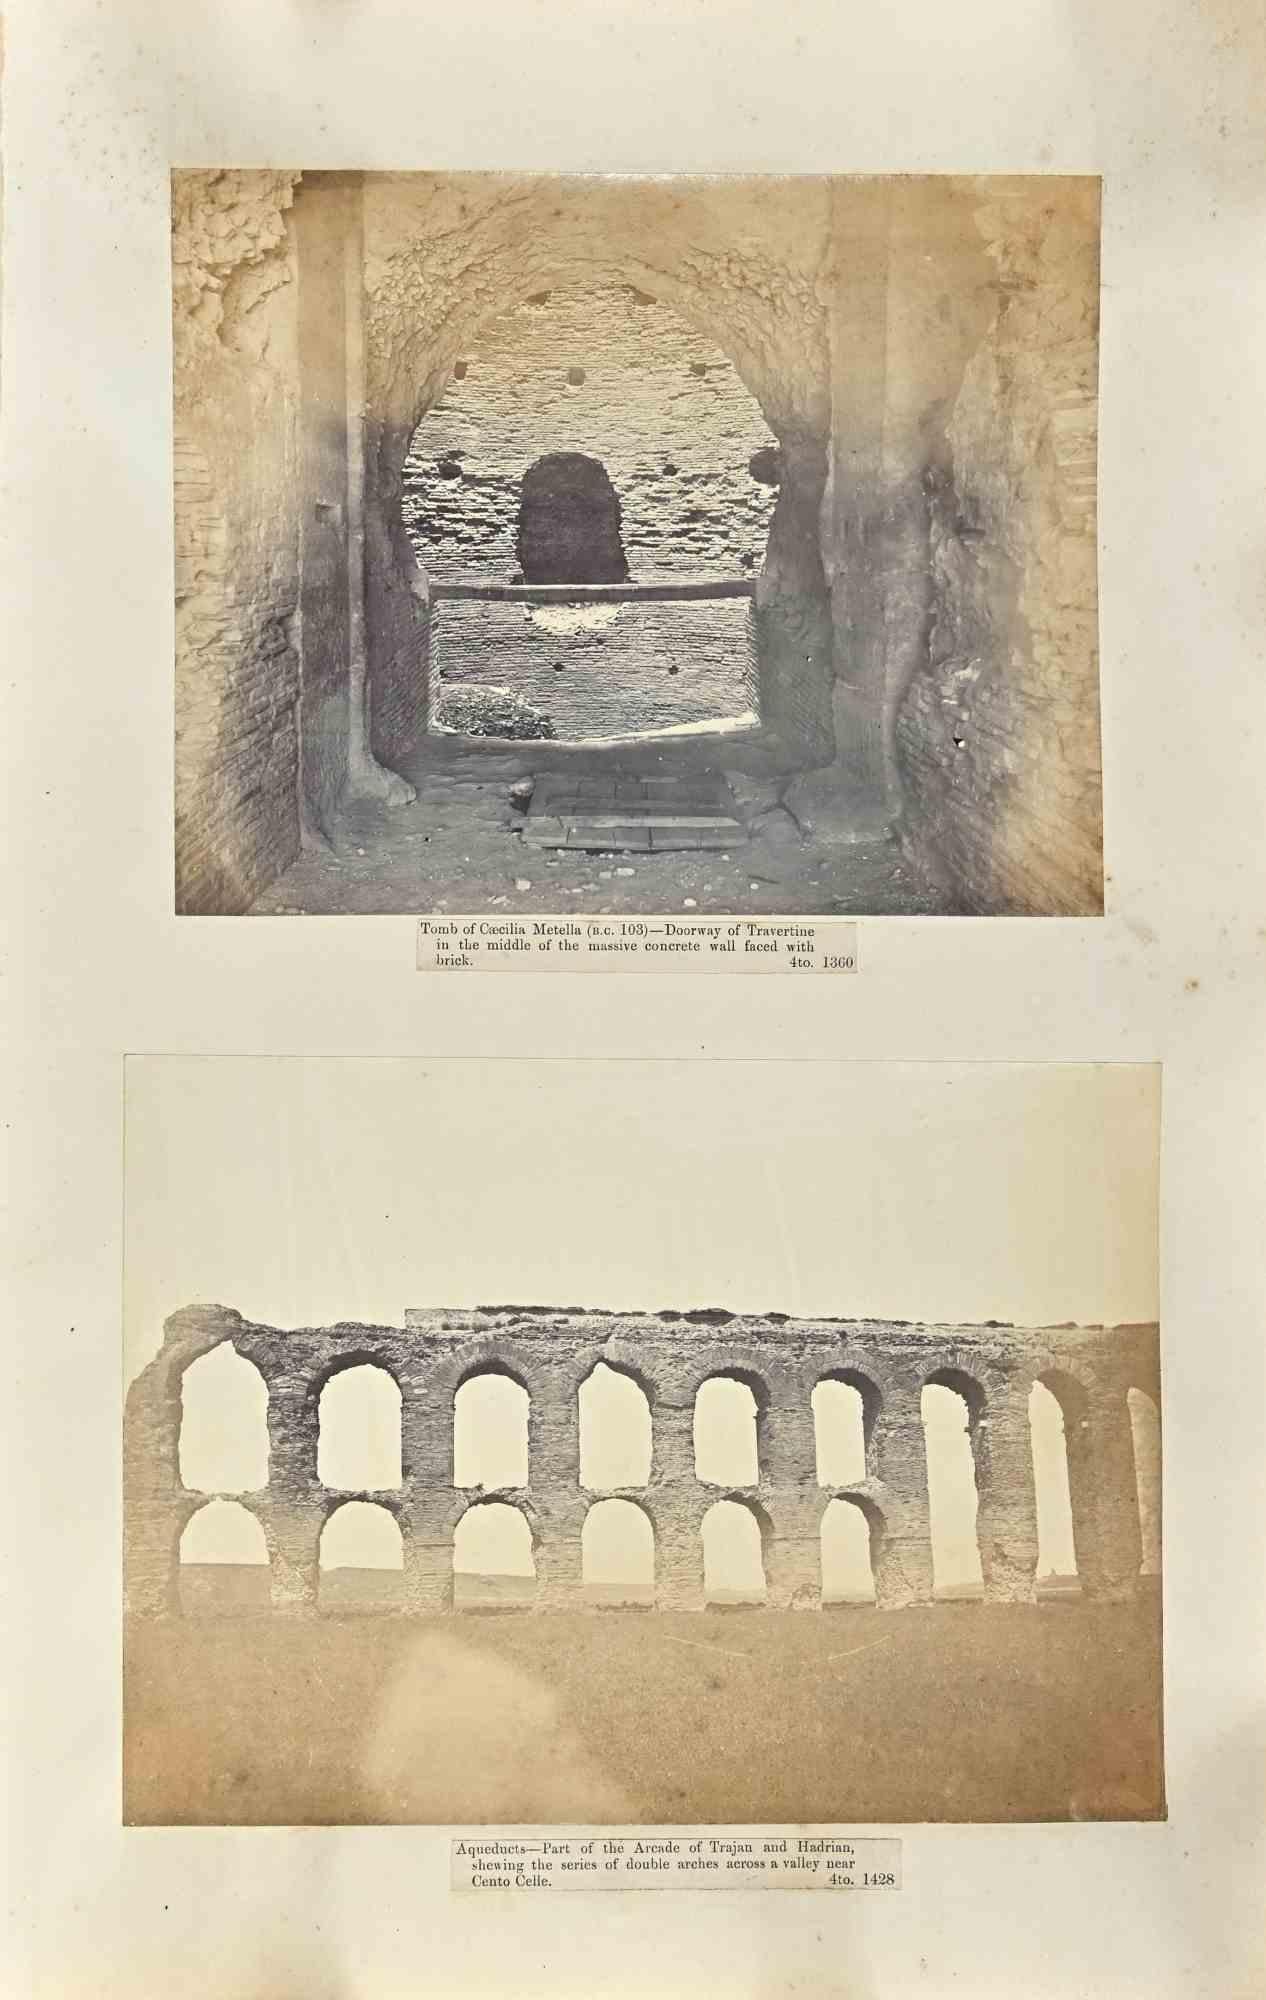 Unknown Figurative Photograph - Roman Monuments - Vintage Photograph - Early 20th Century